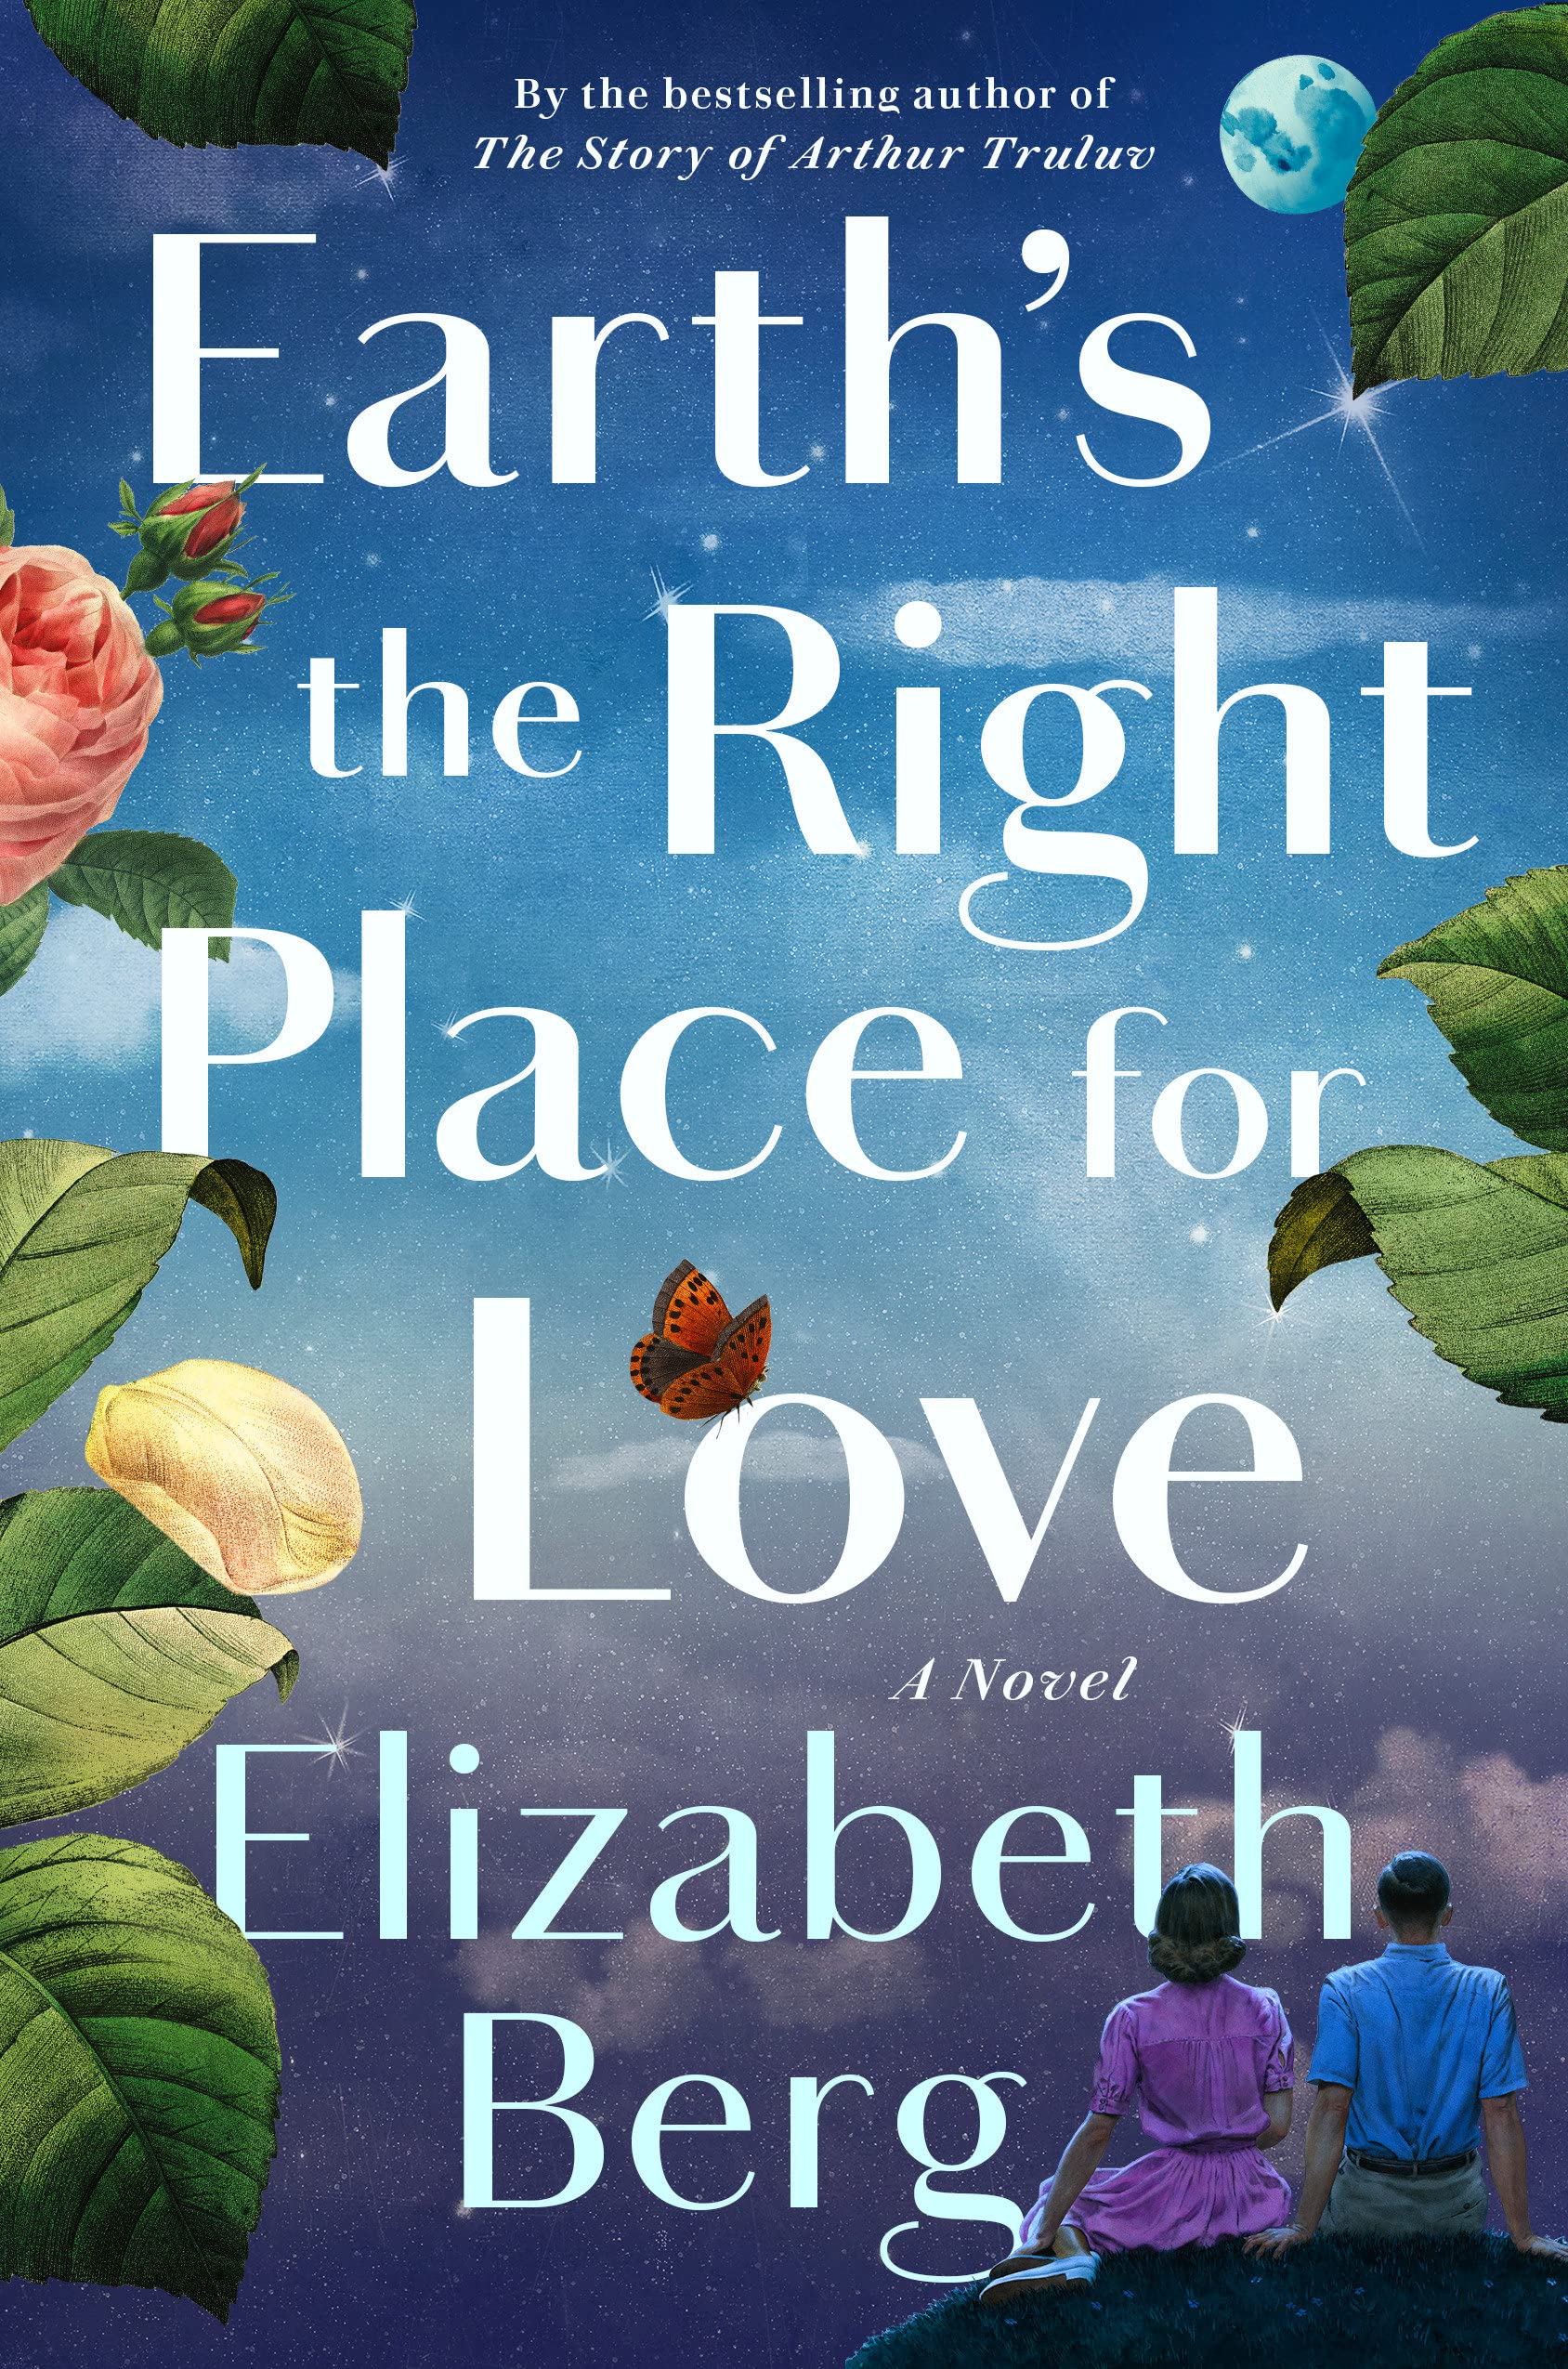 Image for "Earths the Right Place for Love"